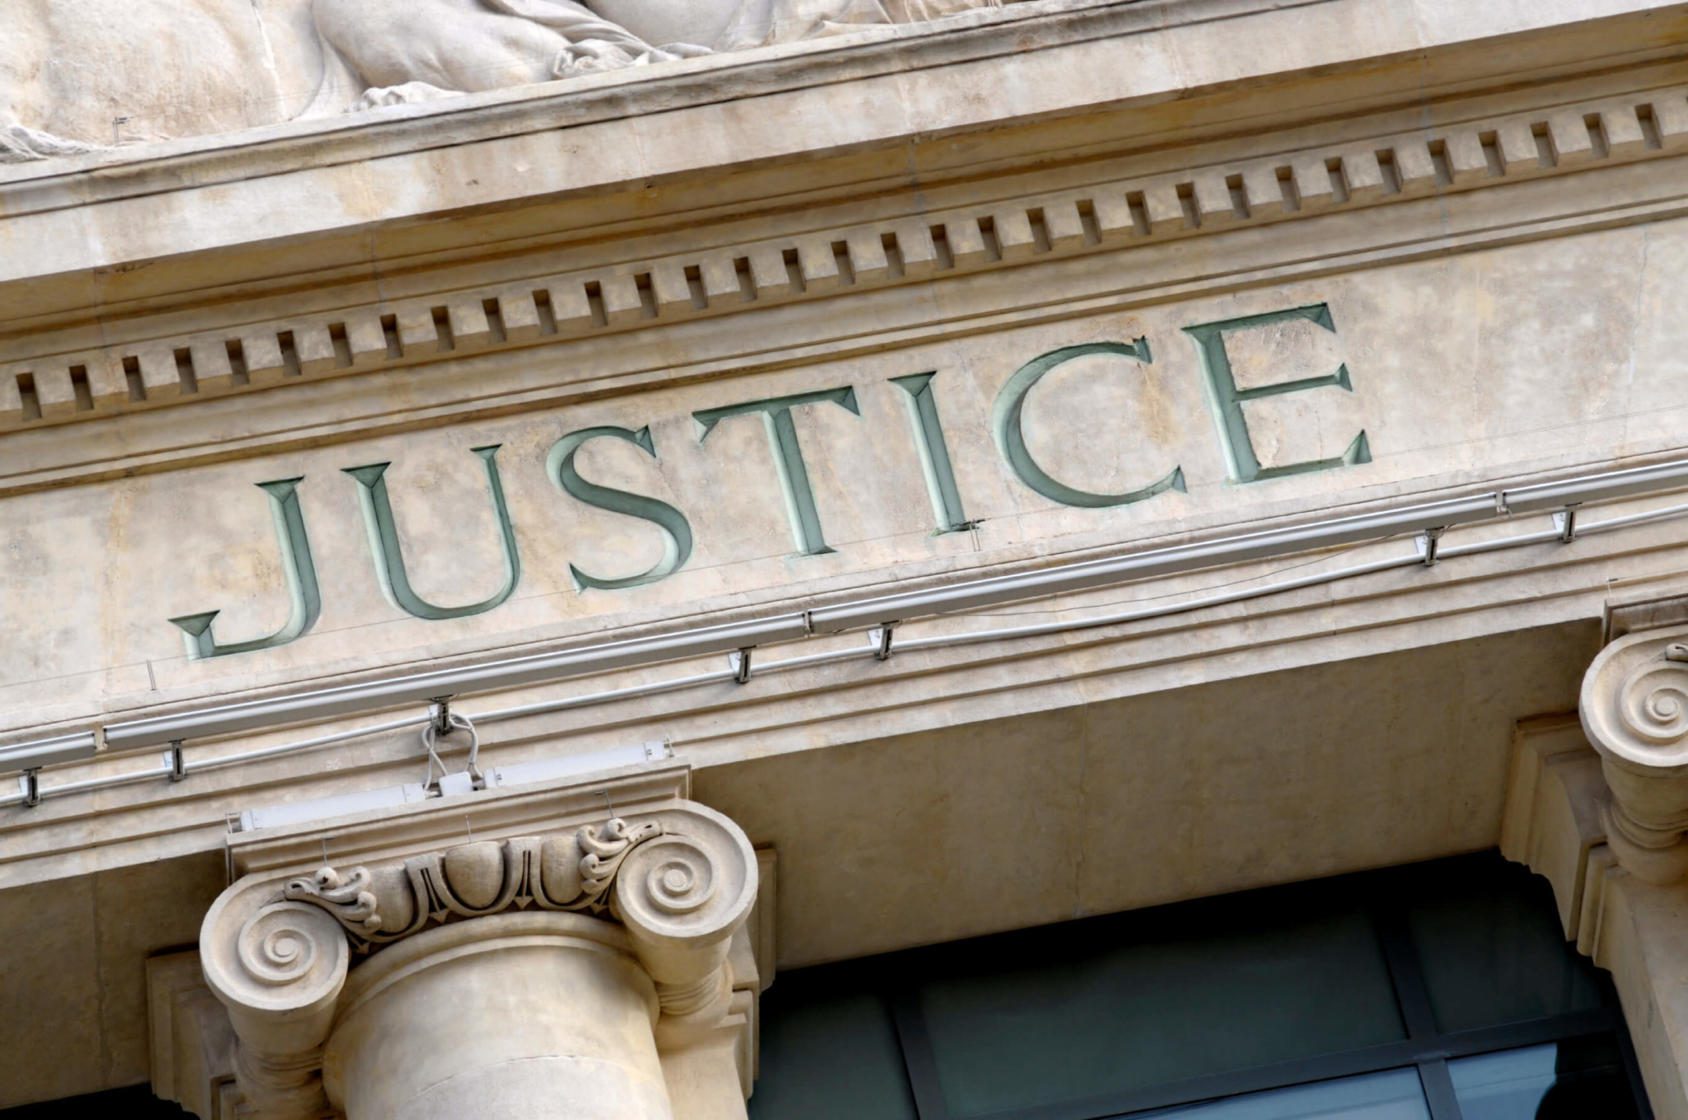 Justice sign on a Law Courts building in France.